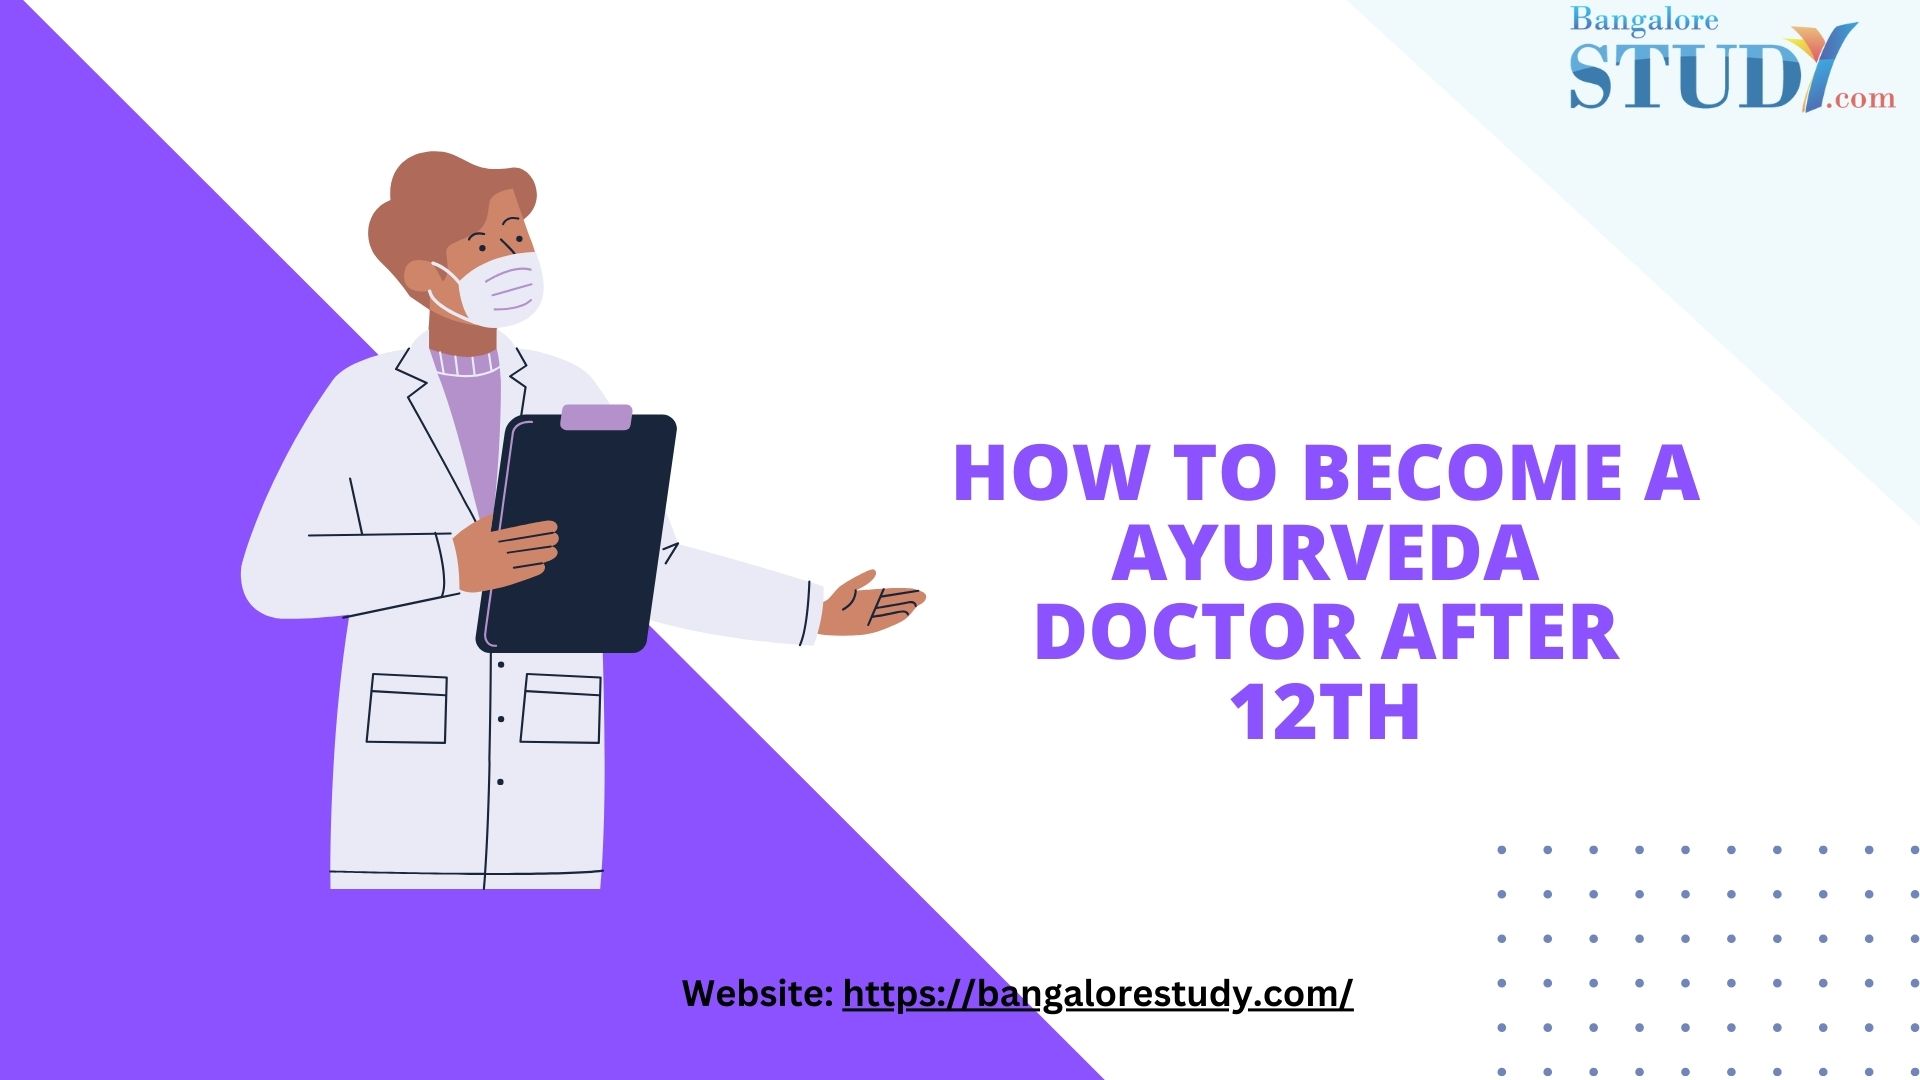 How To Become a Ayurveda Doctor